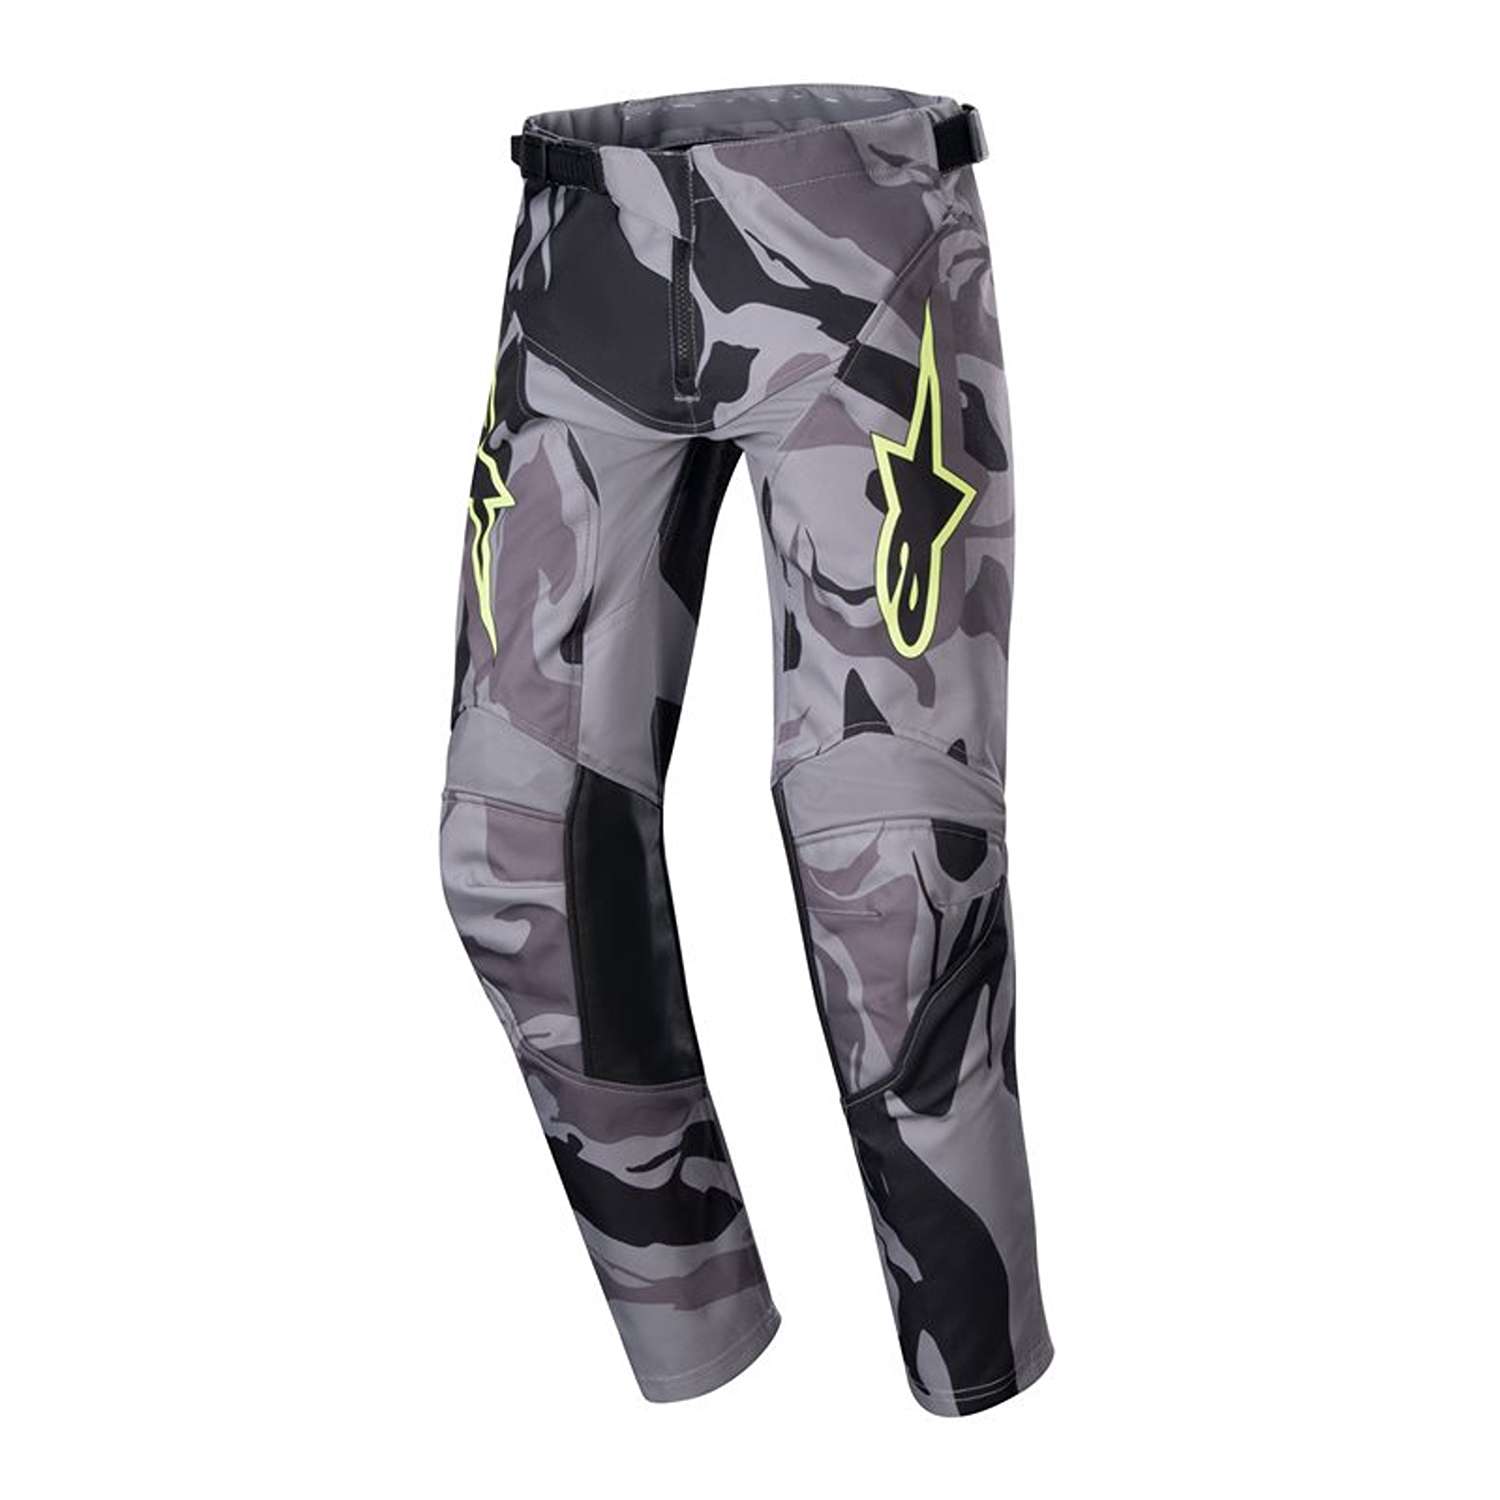 Image of Alpinestars Youth Racer Tactical Pants Cast Gray Camo Magnet Size 26 EN